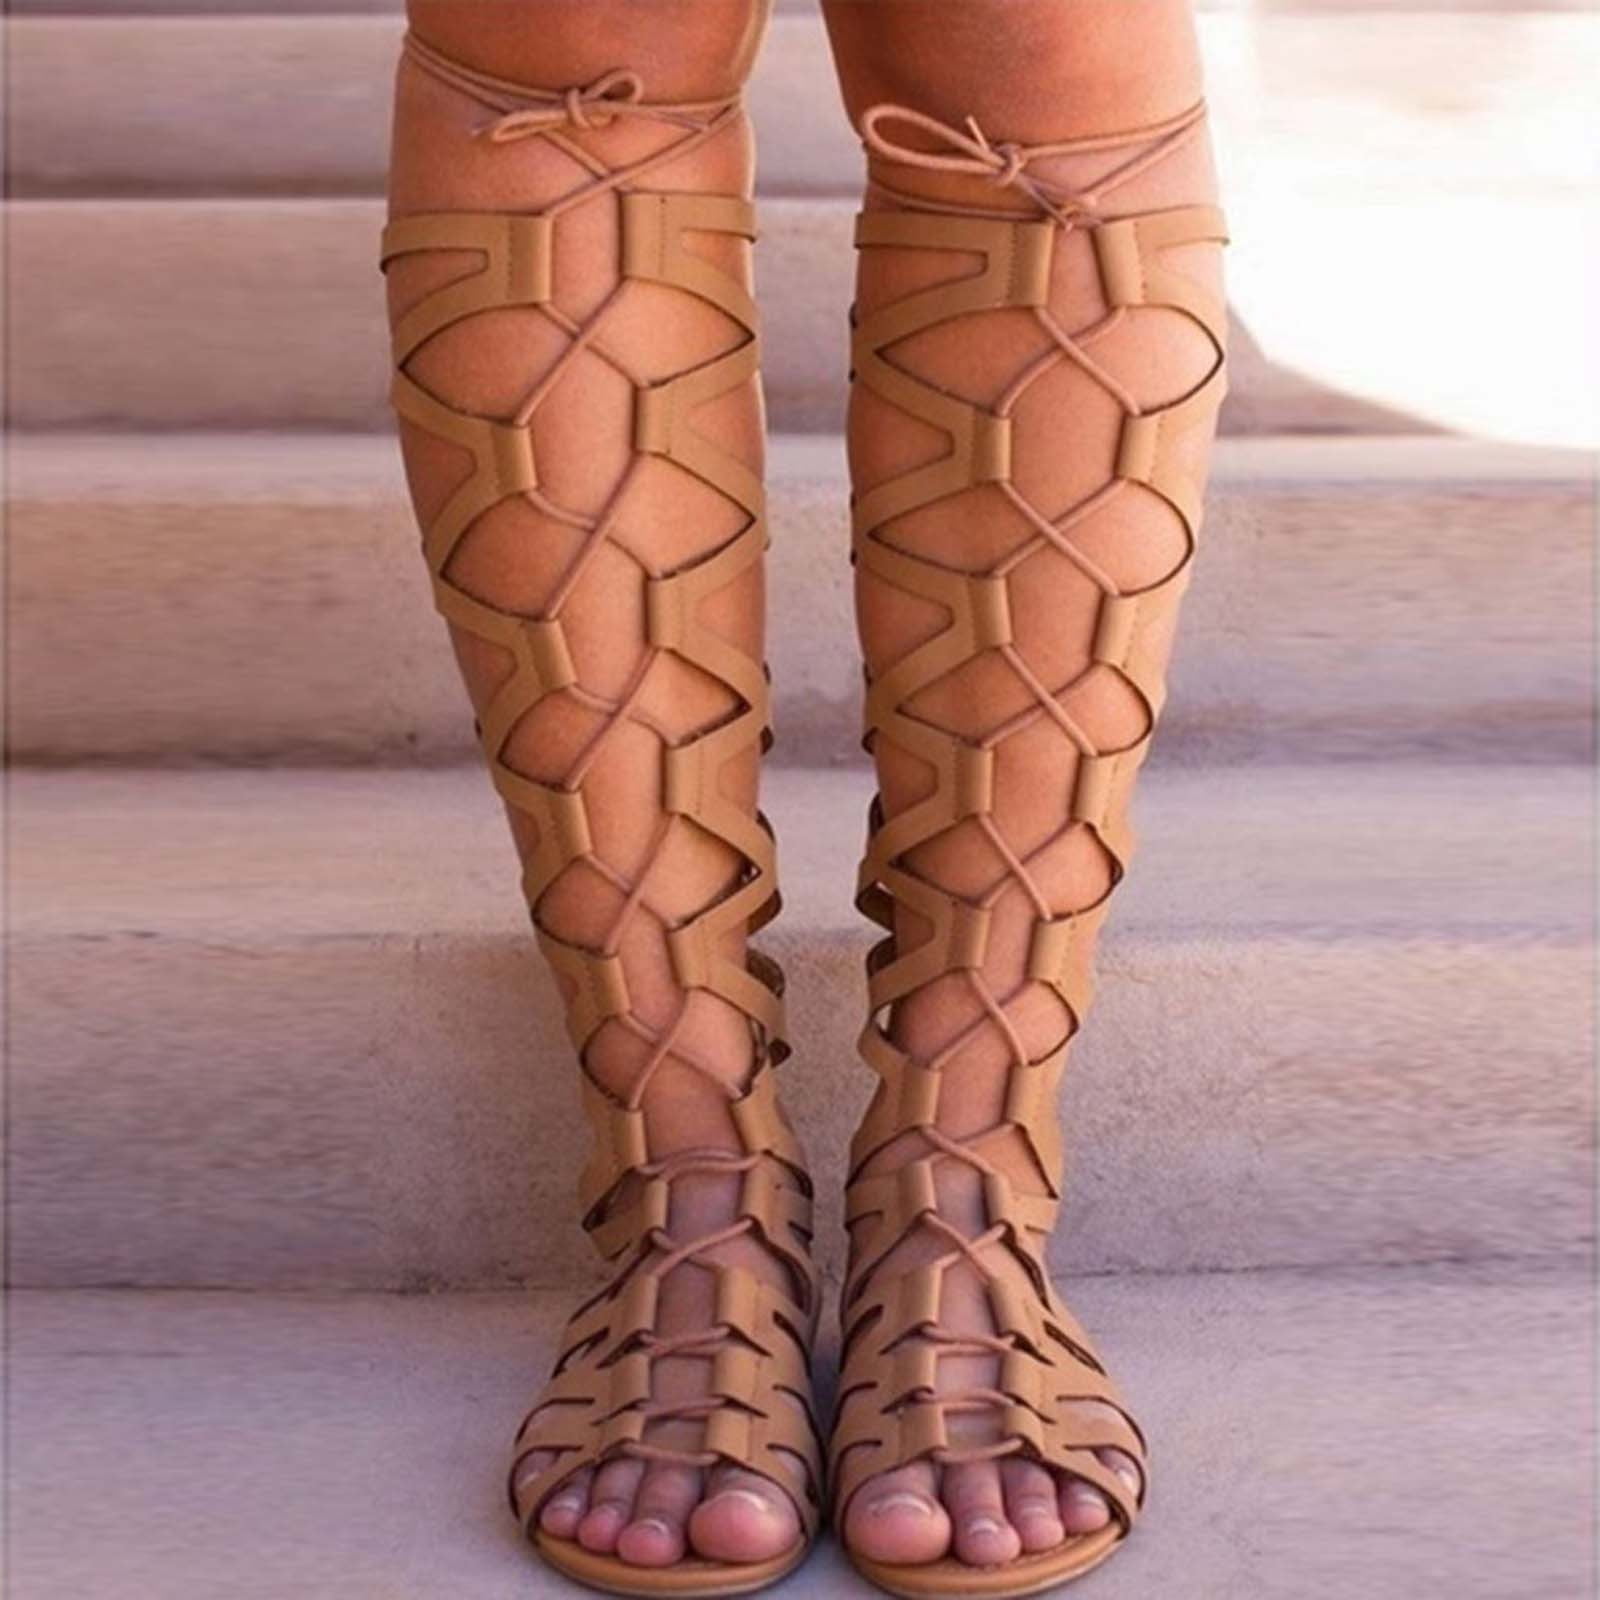 How to wear gladiator sandals 16 Outfit Ideas | Shoes heels stilettos, Heels,  Gladiator sandals outfit